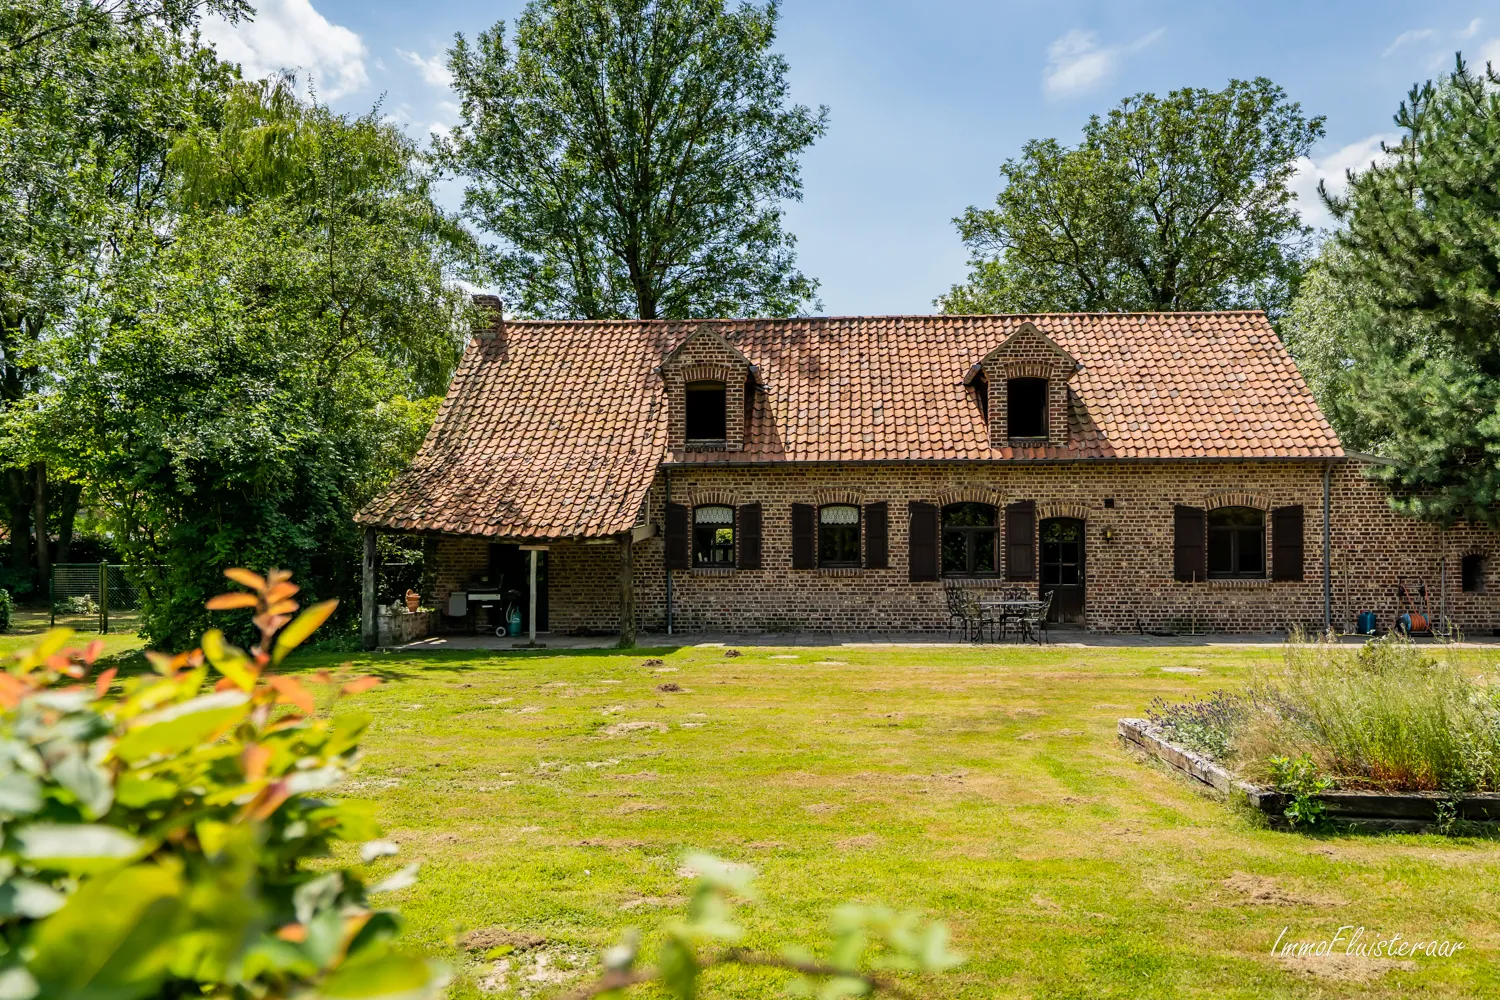 For sale property - Geetbets